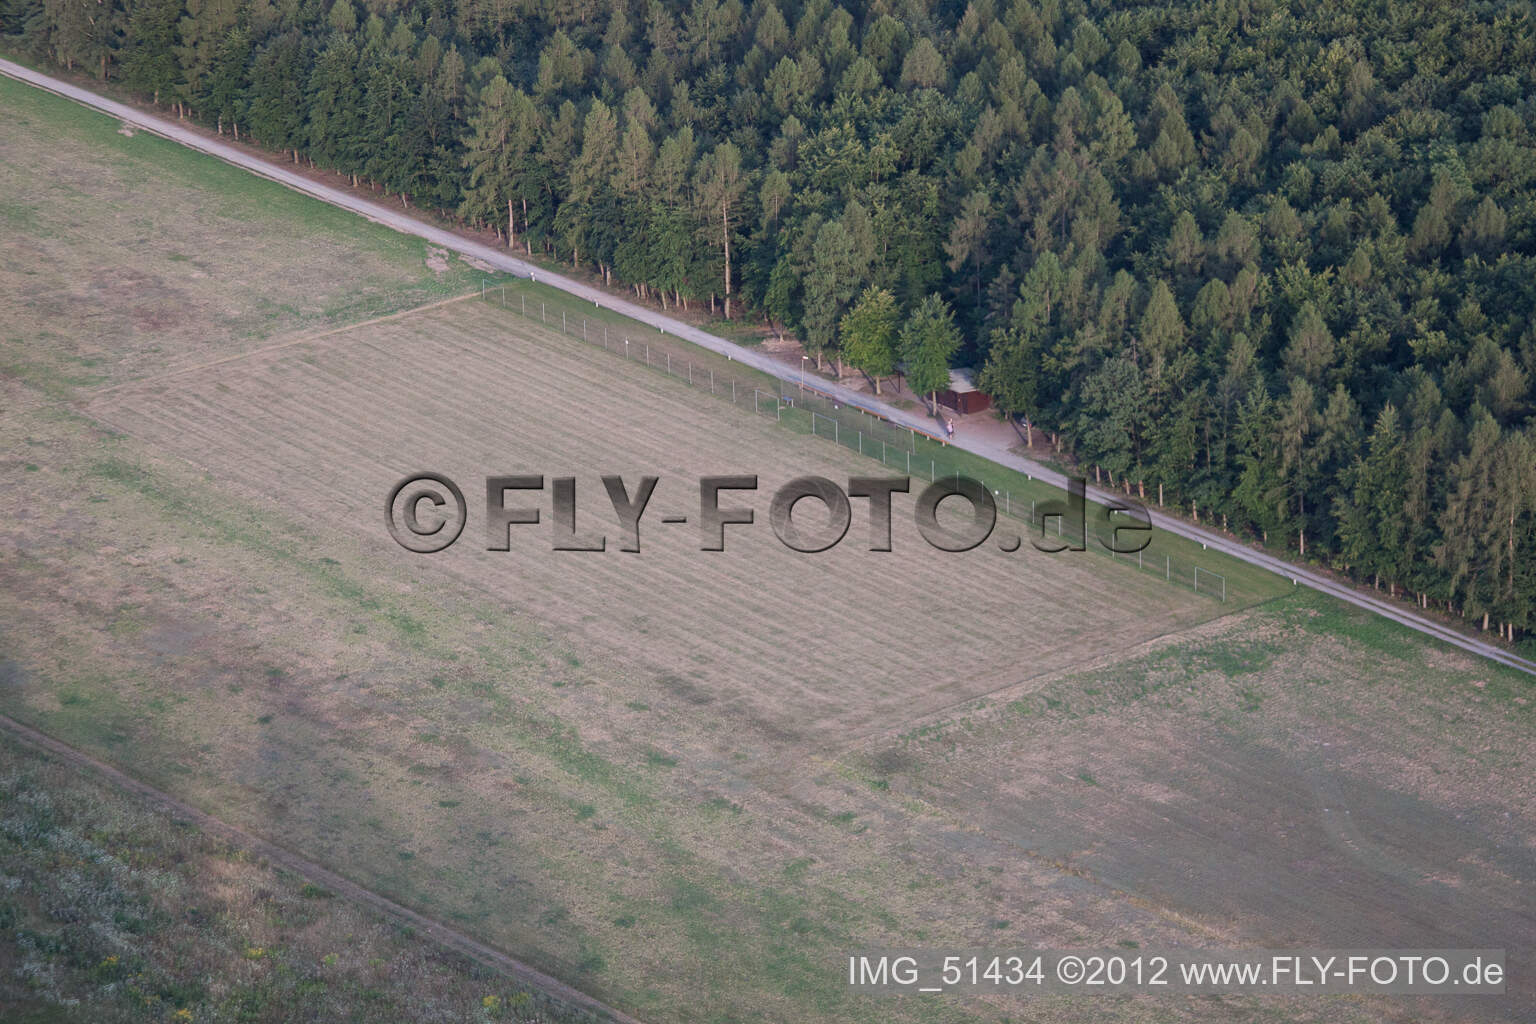 Aerial view of Model airfield in Rülzheim in the state Rhineland-Palatinate, Germany